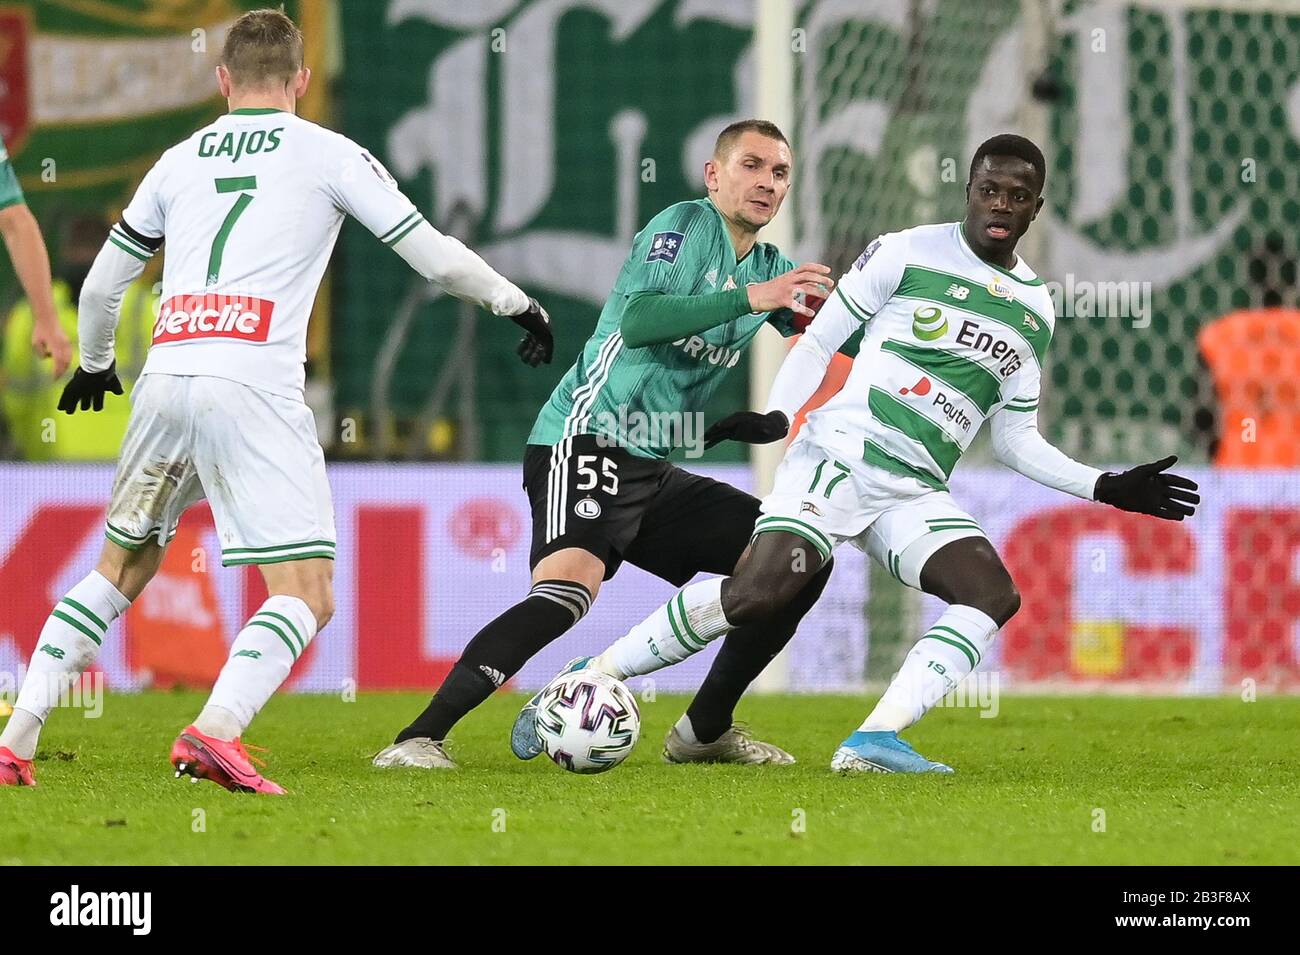 Artur Jedrzejczyk of Legia (L) and Ze Gomes of Lechia (R) are seen in action during the Polish Ekstraklasa match between Lechia Gdansk and Legia Warsaw. ( Final score; Lechia Gdansk 0:2 Legia Warsaw) Stock Photo